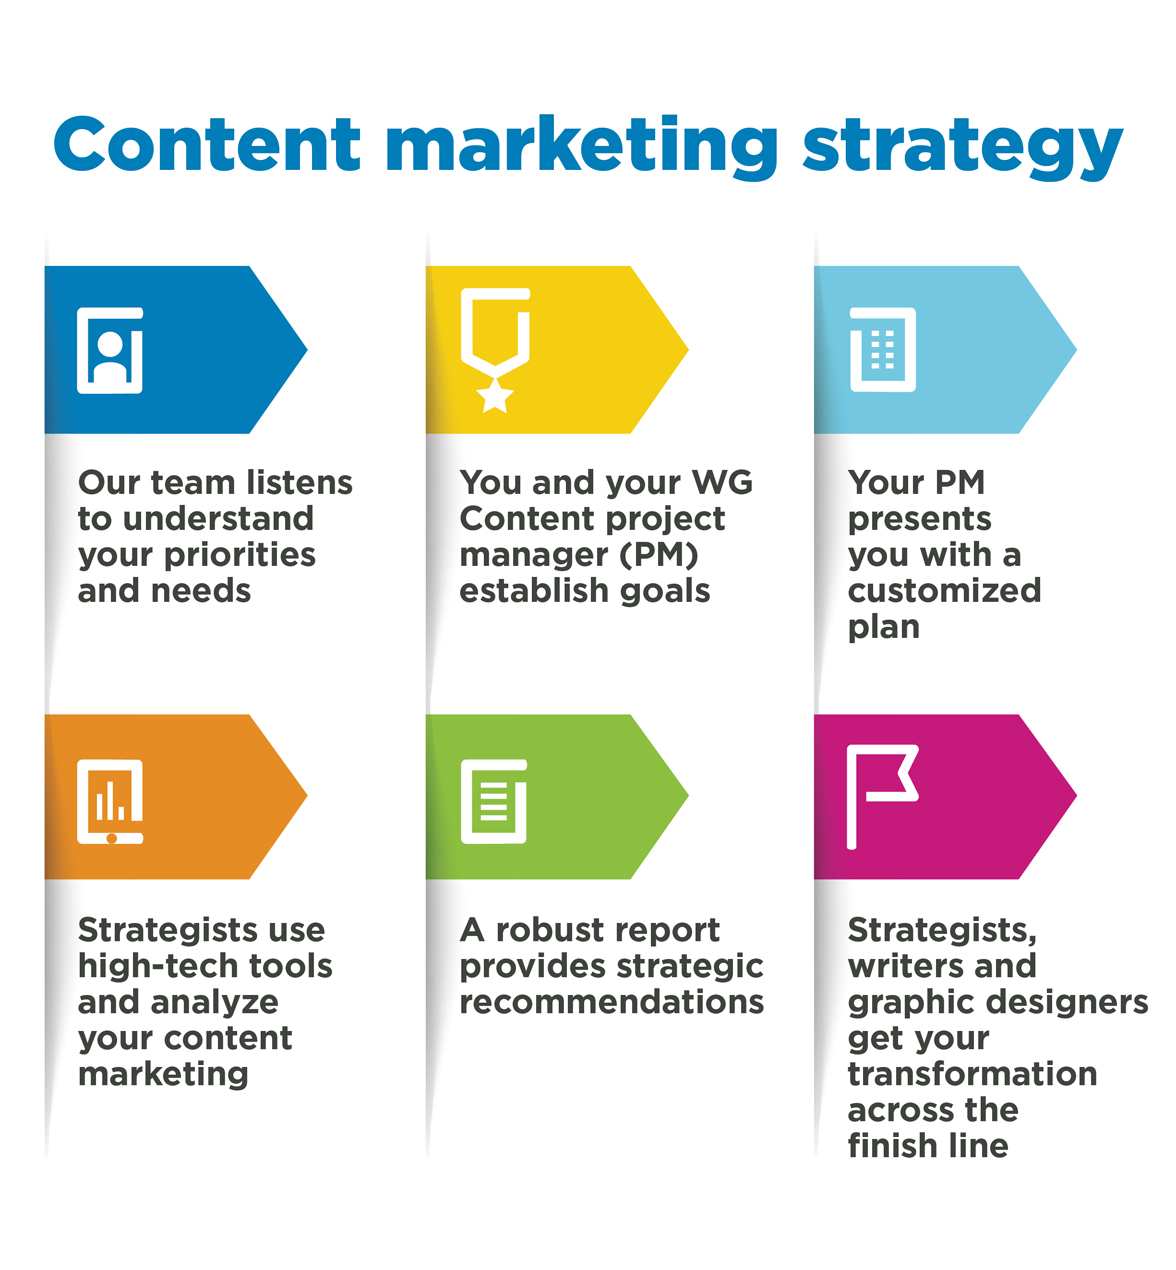 WG Content's approach to content marketing strategy.